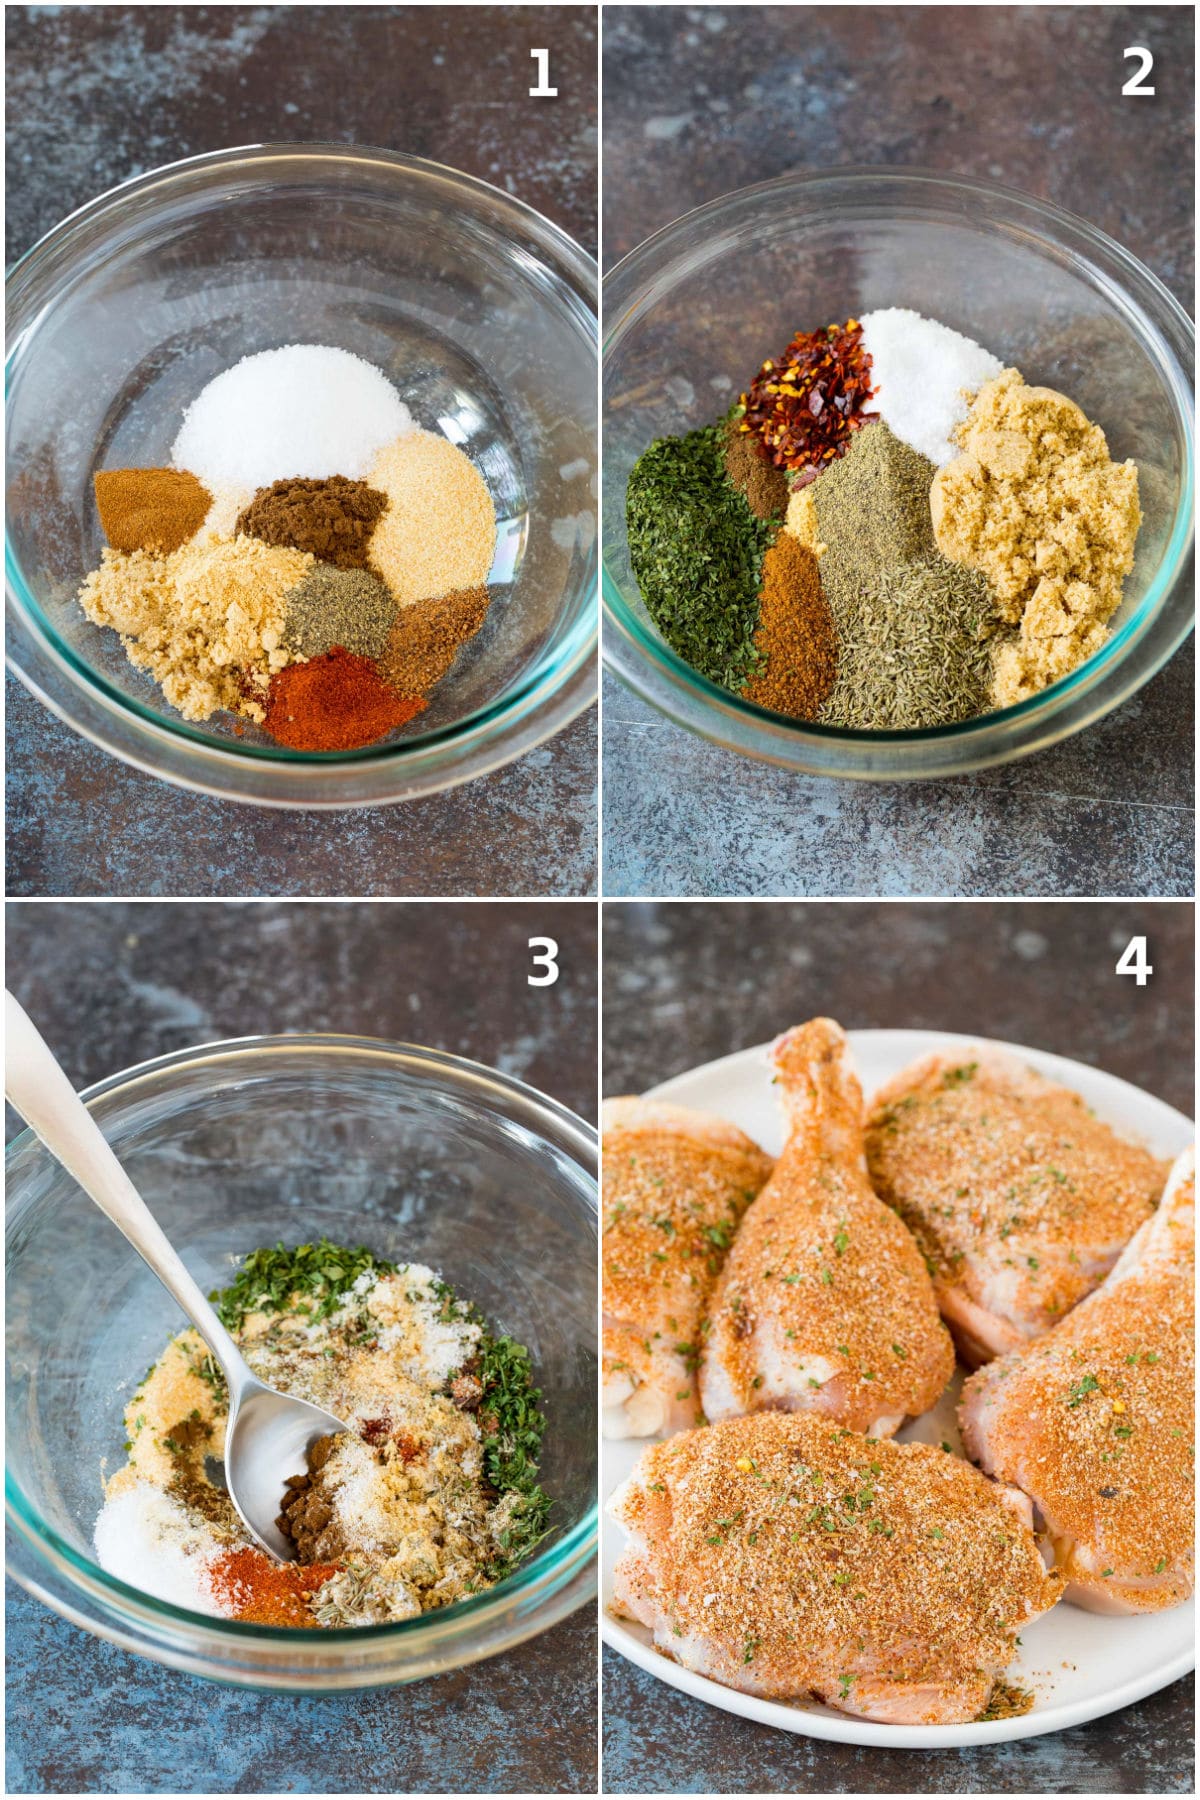 Step by step process shots showing how to make spice blend.